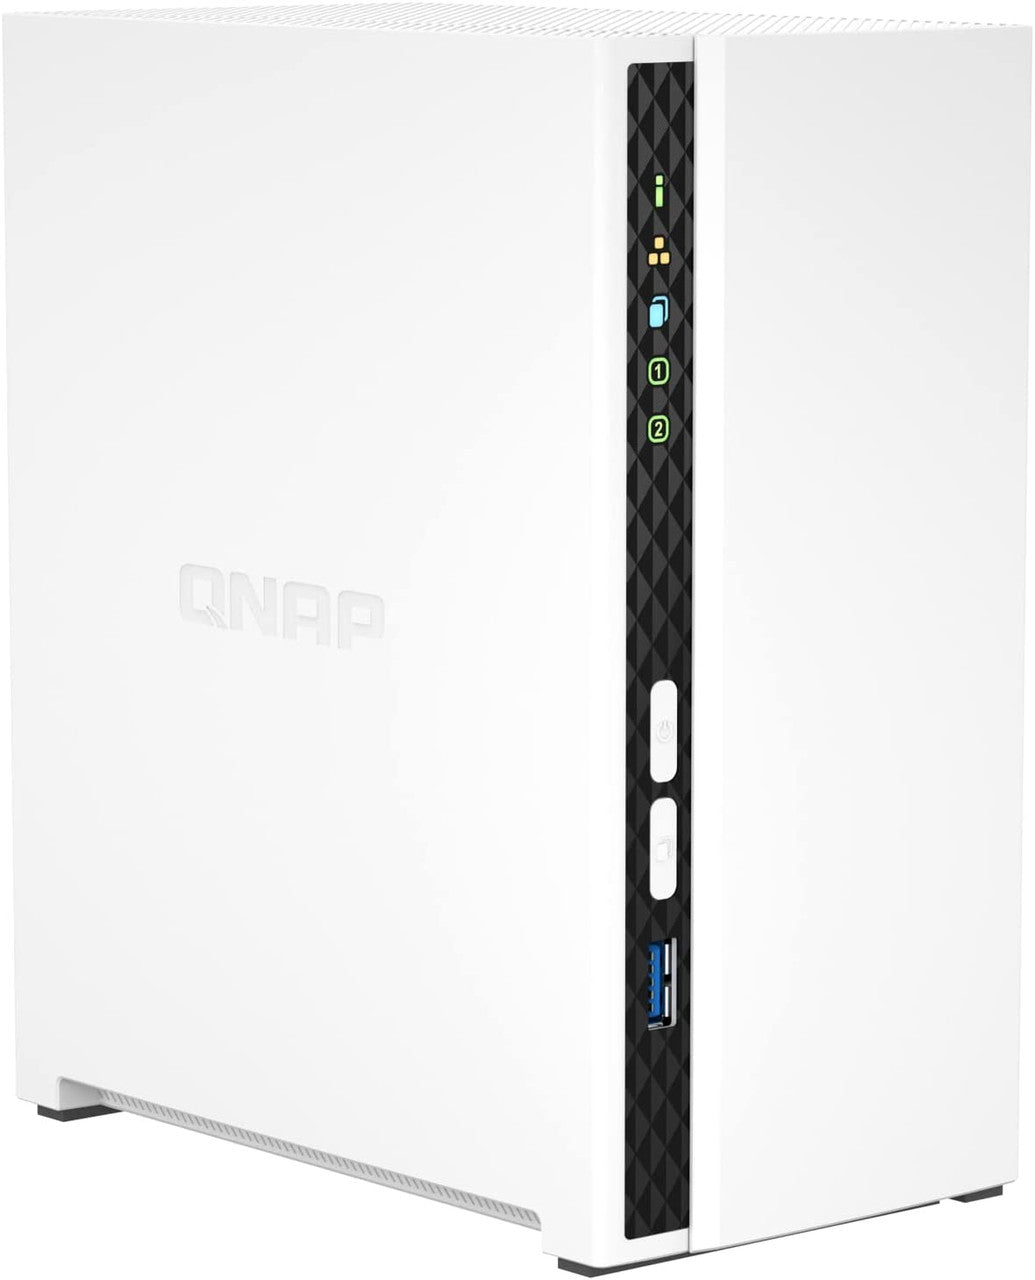 QNAP TS-233 2-Bay Desktop NAS with a 28TB (2 x 14TB) of Western Digital Red Plus Drives Fully Assembled and Tested